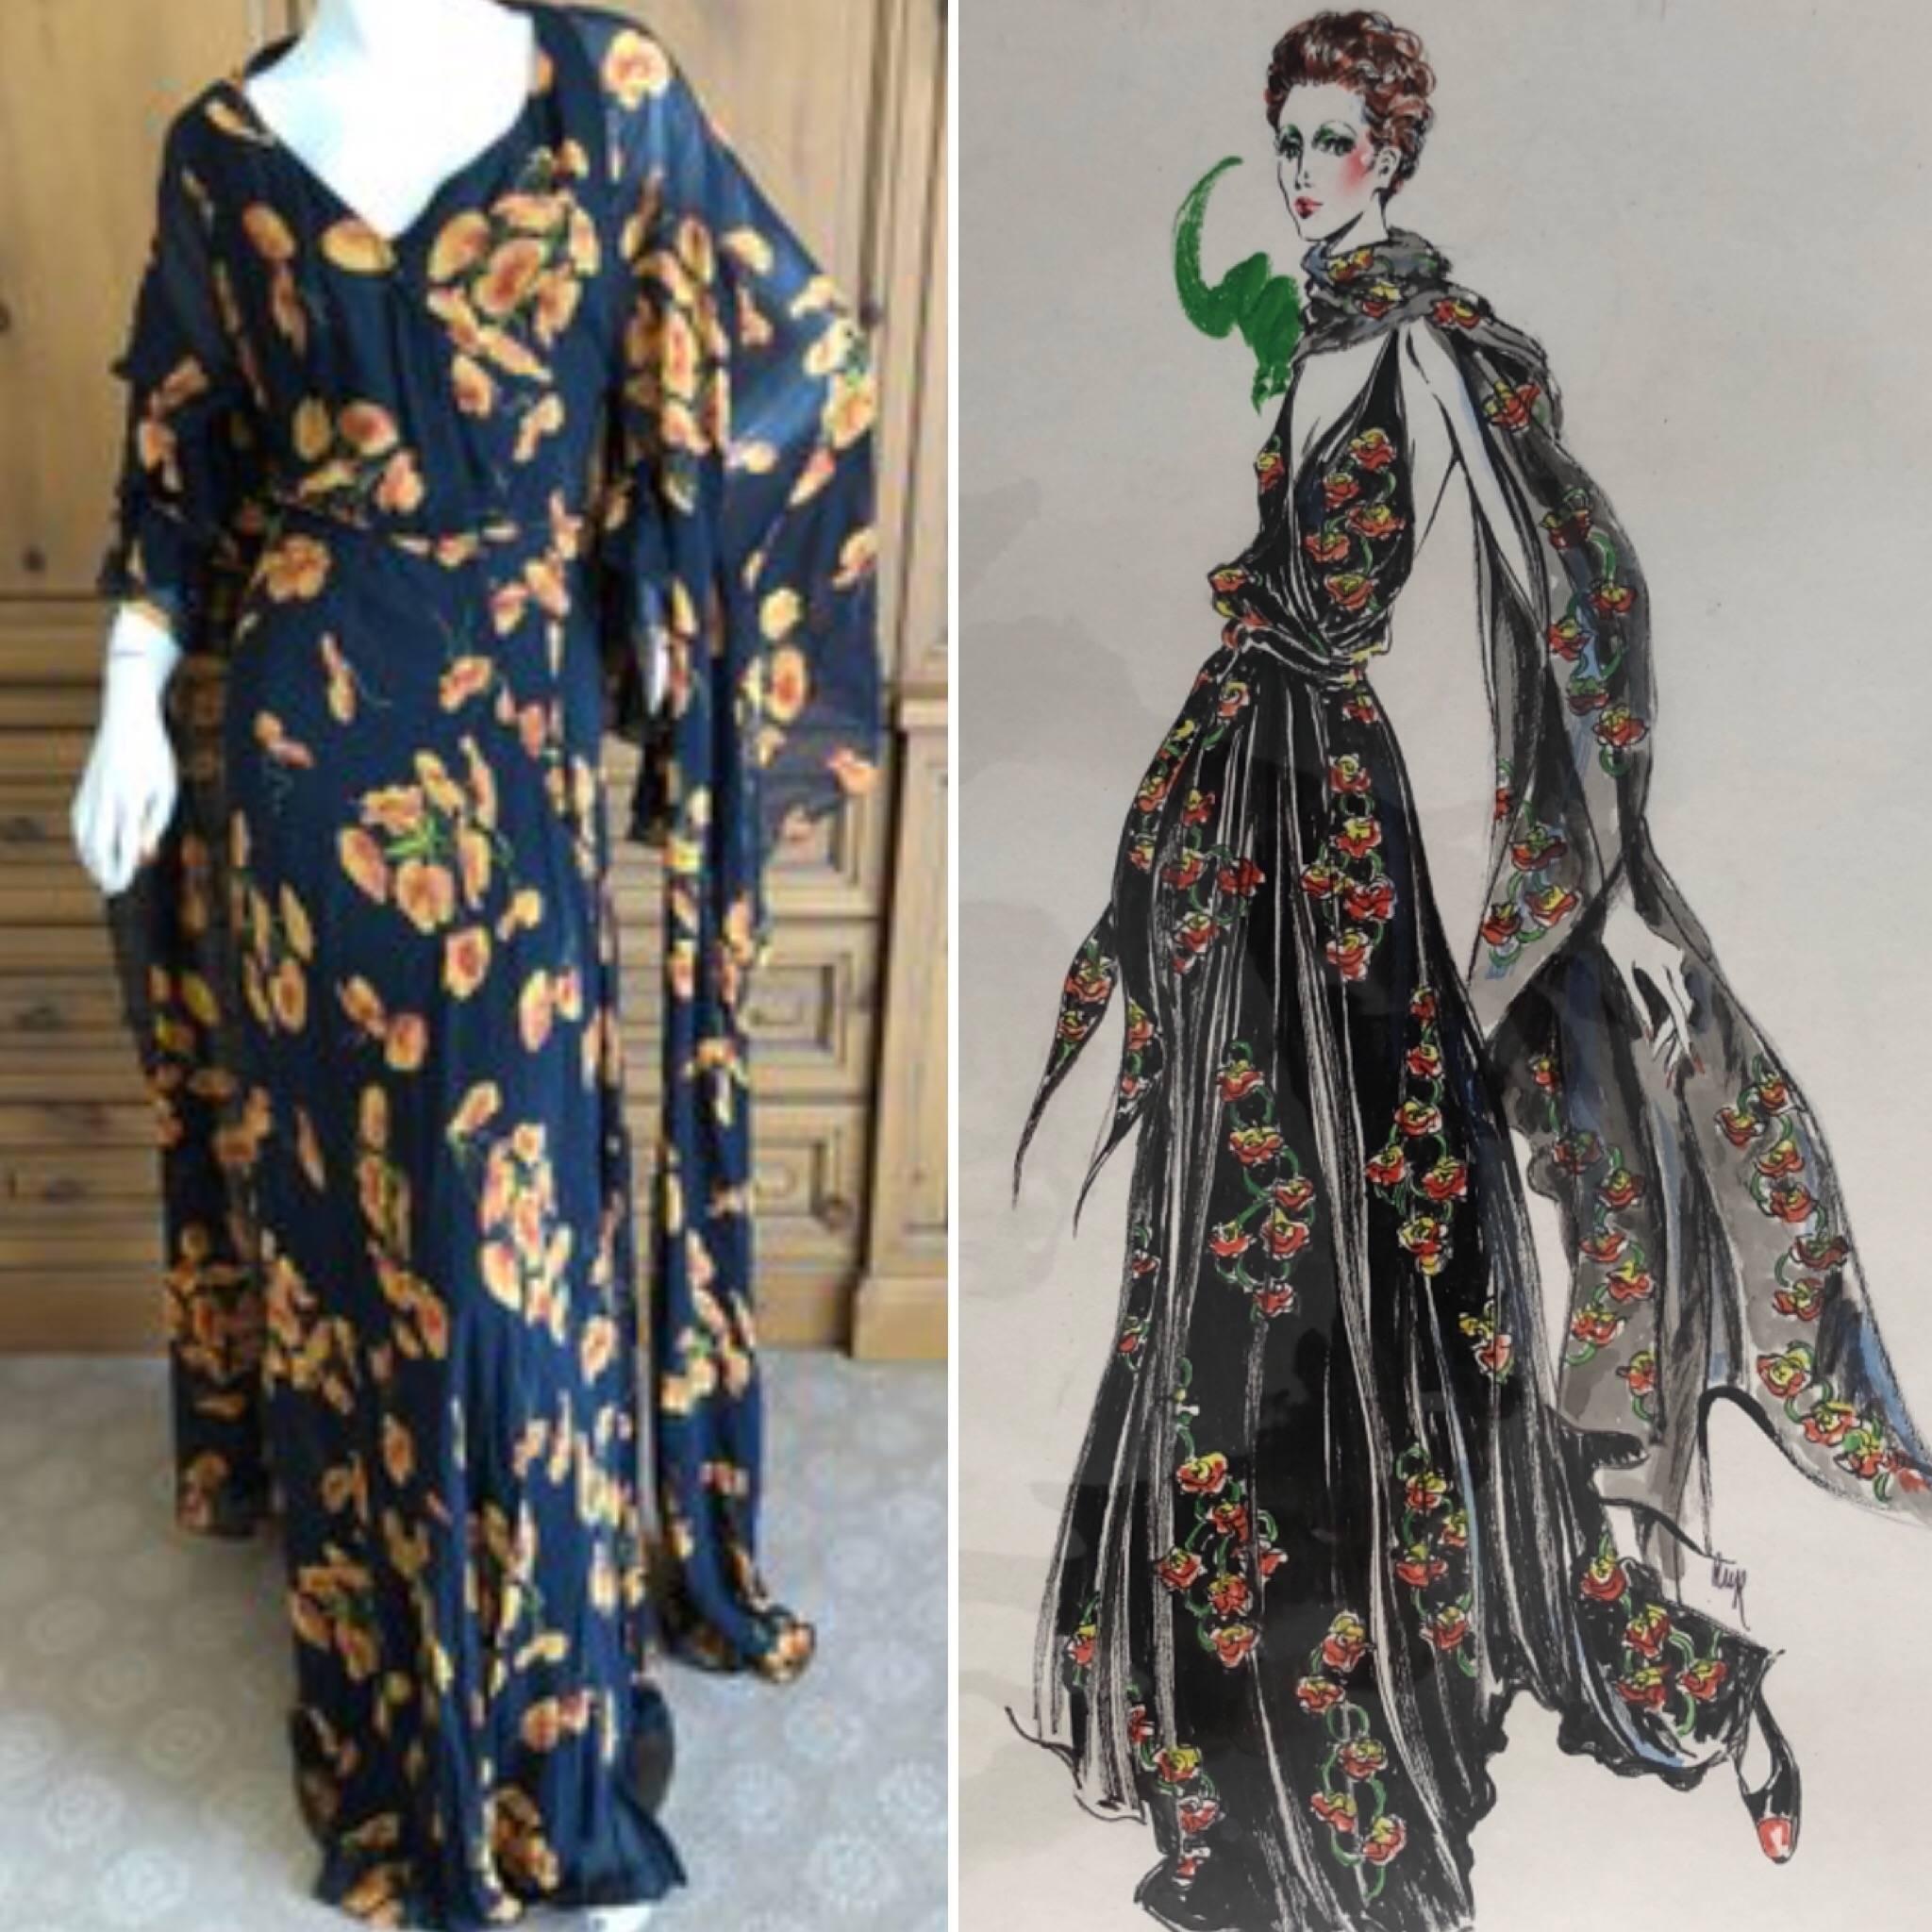 Cardinali Silk Chiffon Floral Poppy Evening Dress with Unusual Cape Back
Comes with original design drawing by renowned fashion illustrator Robert W. Richards
From the Archive of Marilyn Lewis, the creator of Cardinali
Cardinali was founded in Los